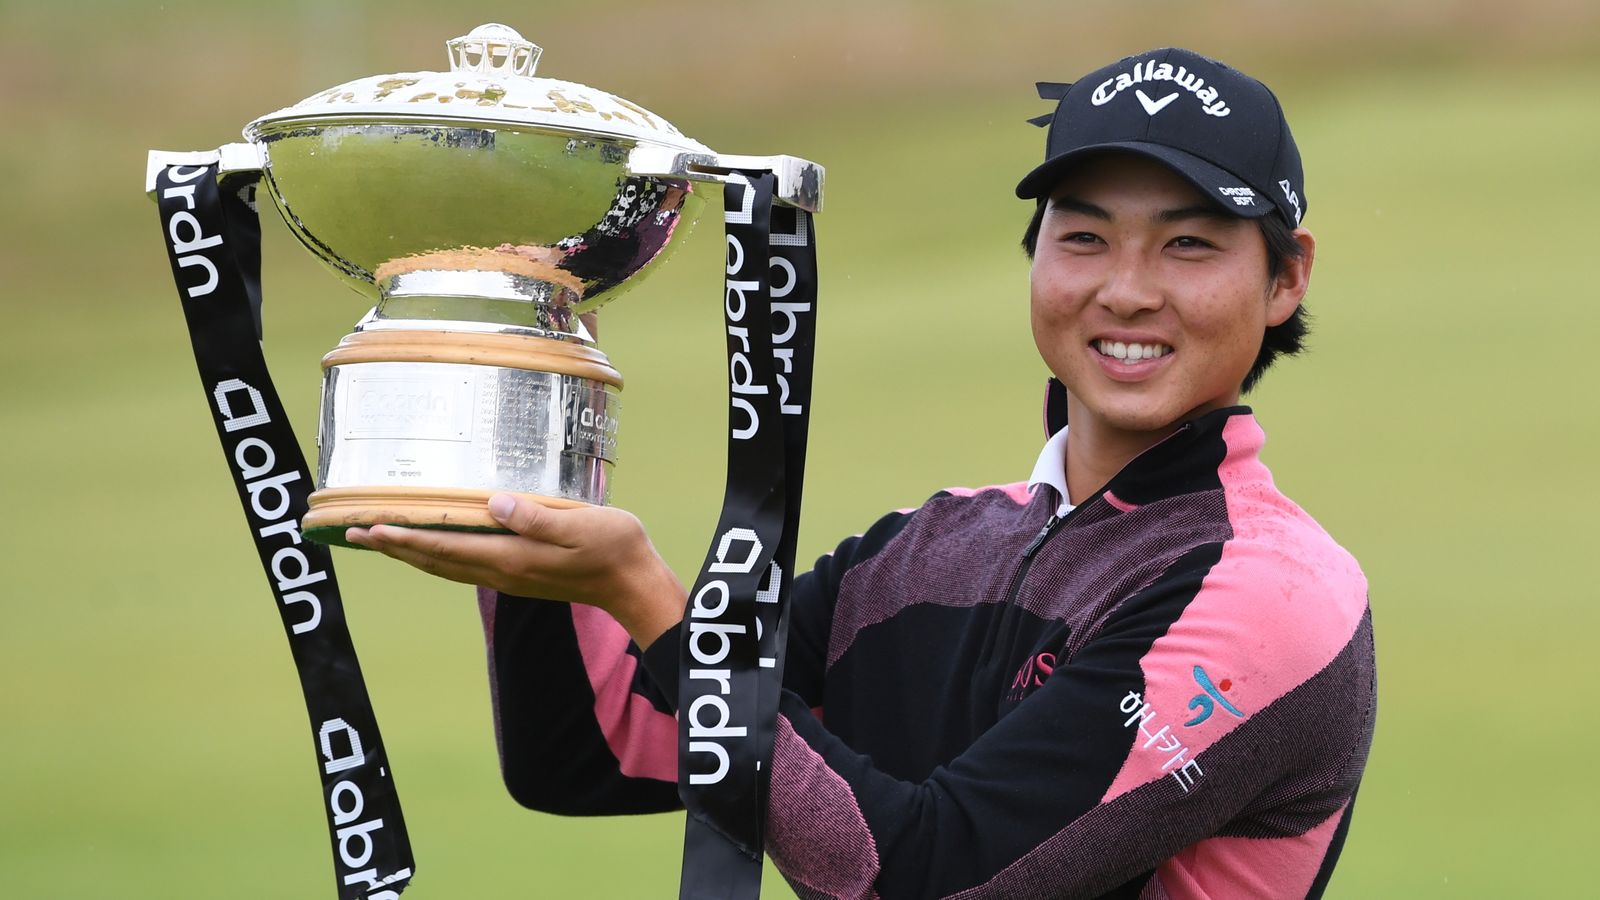 Min Woo Lee Won The Scottish Open In A Playoff Against England’s